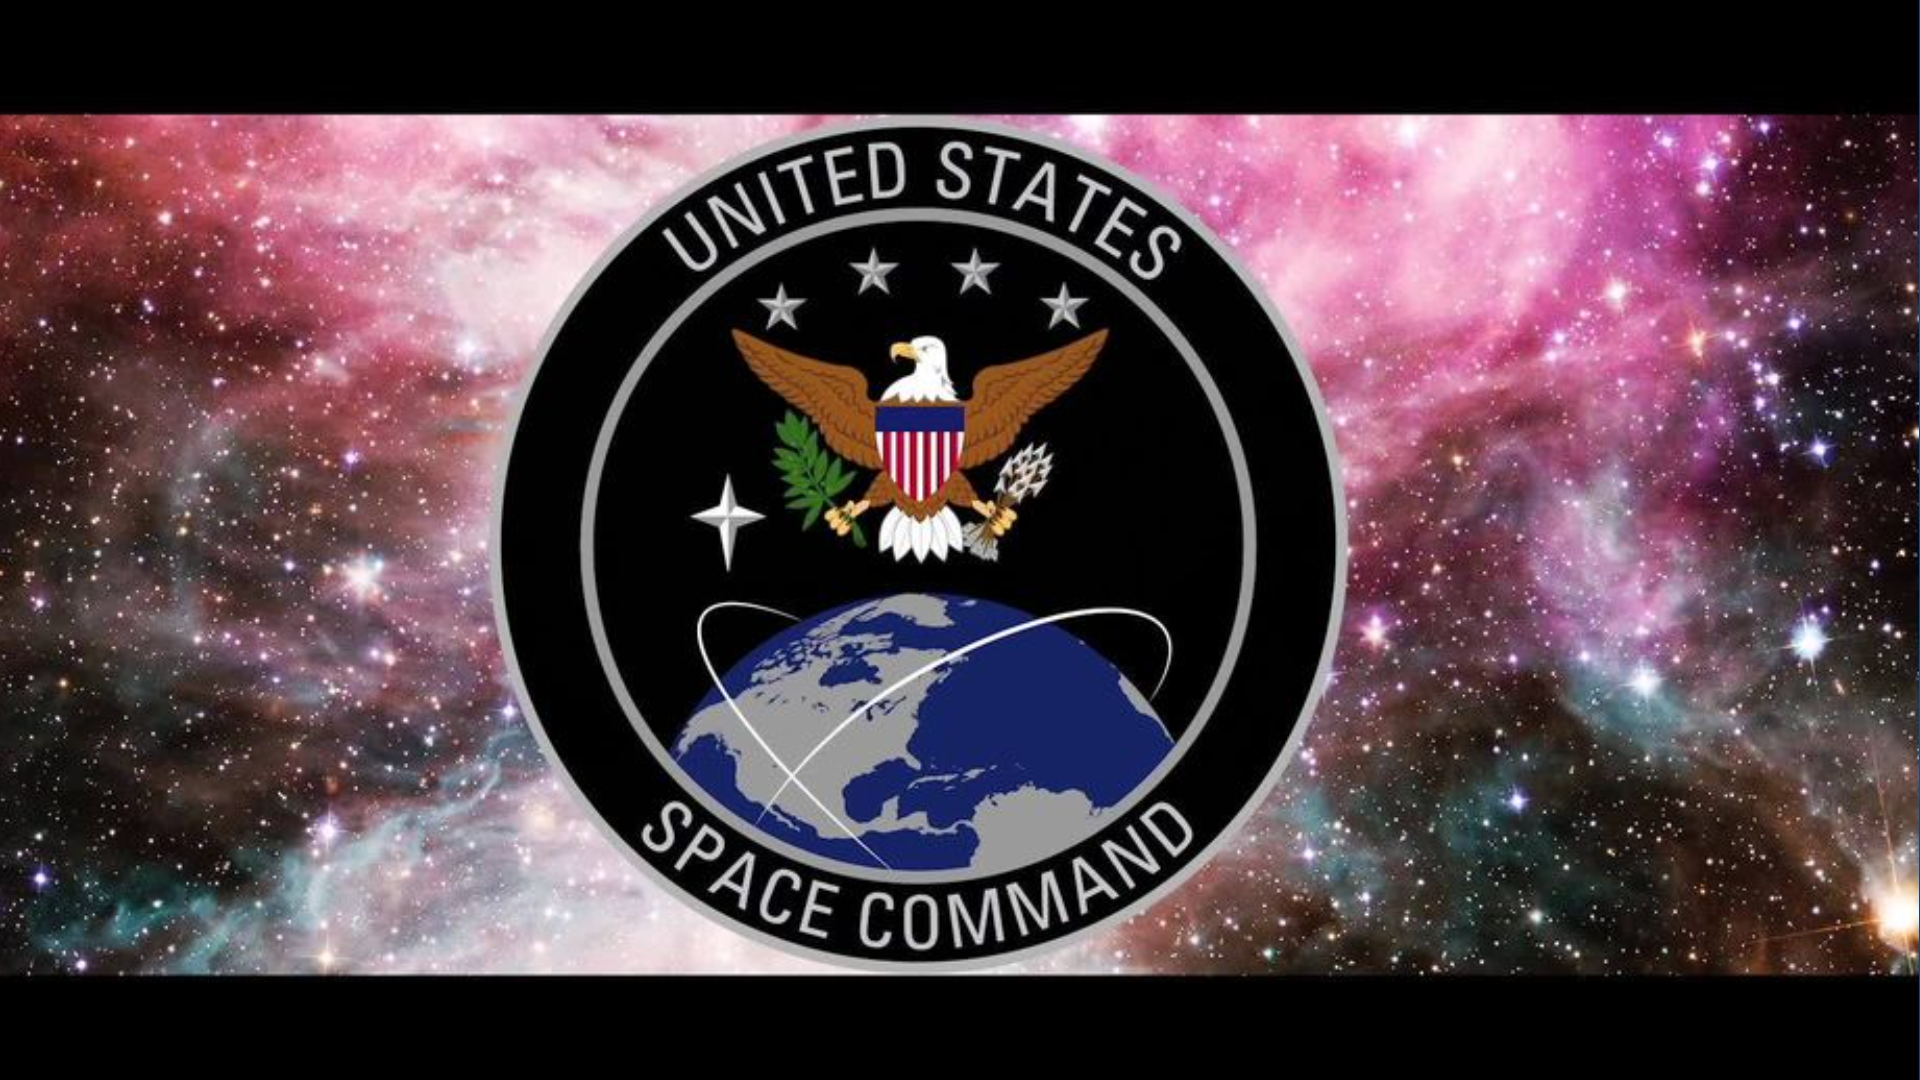 Huntsville is one of the six finalists being considered for the headquarters of the U.S. Space Command.